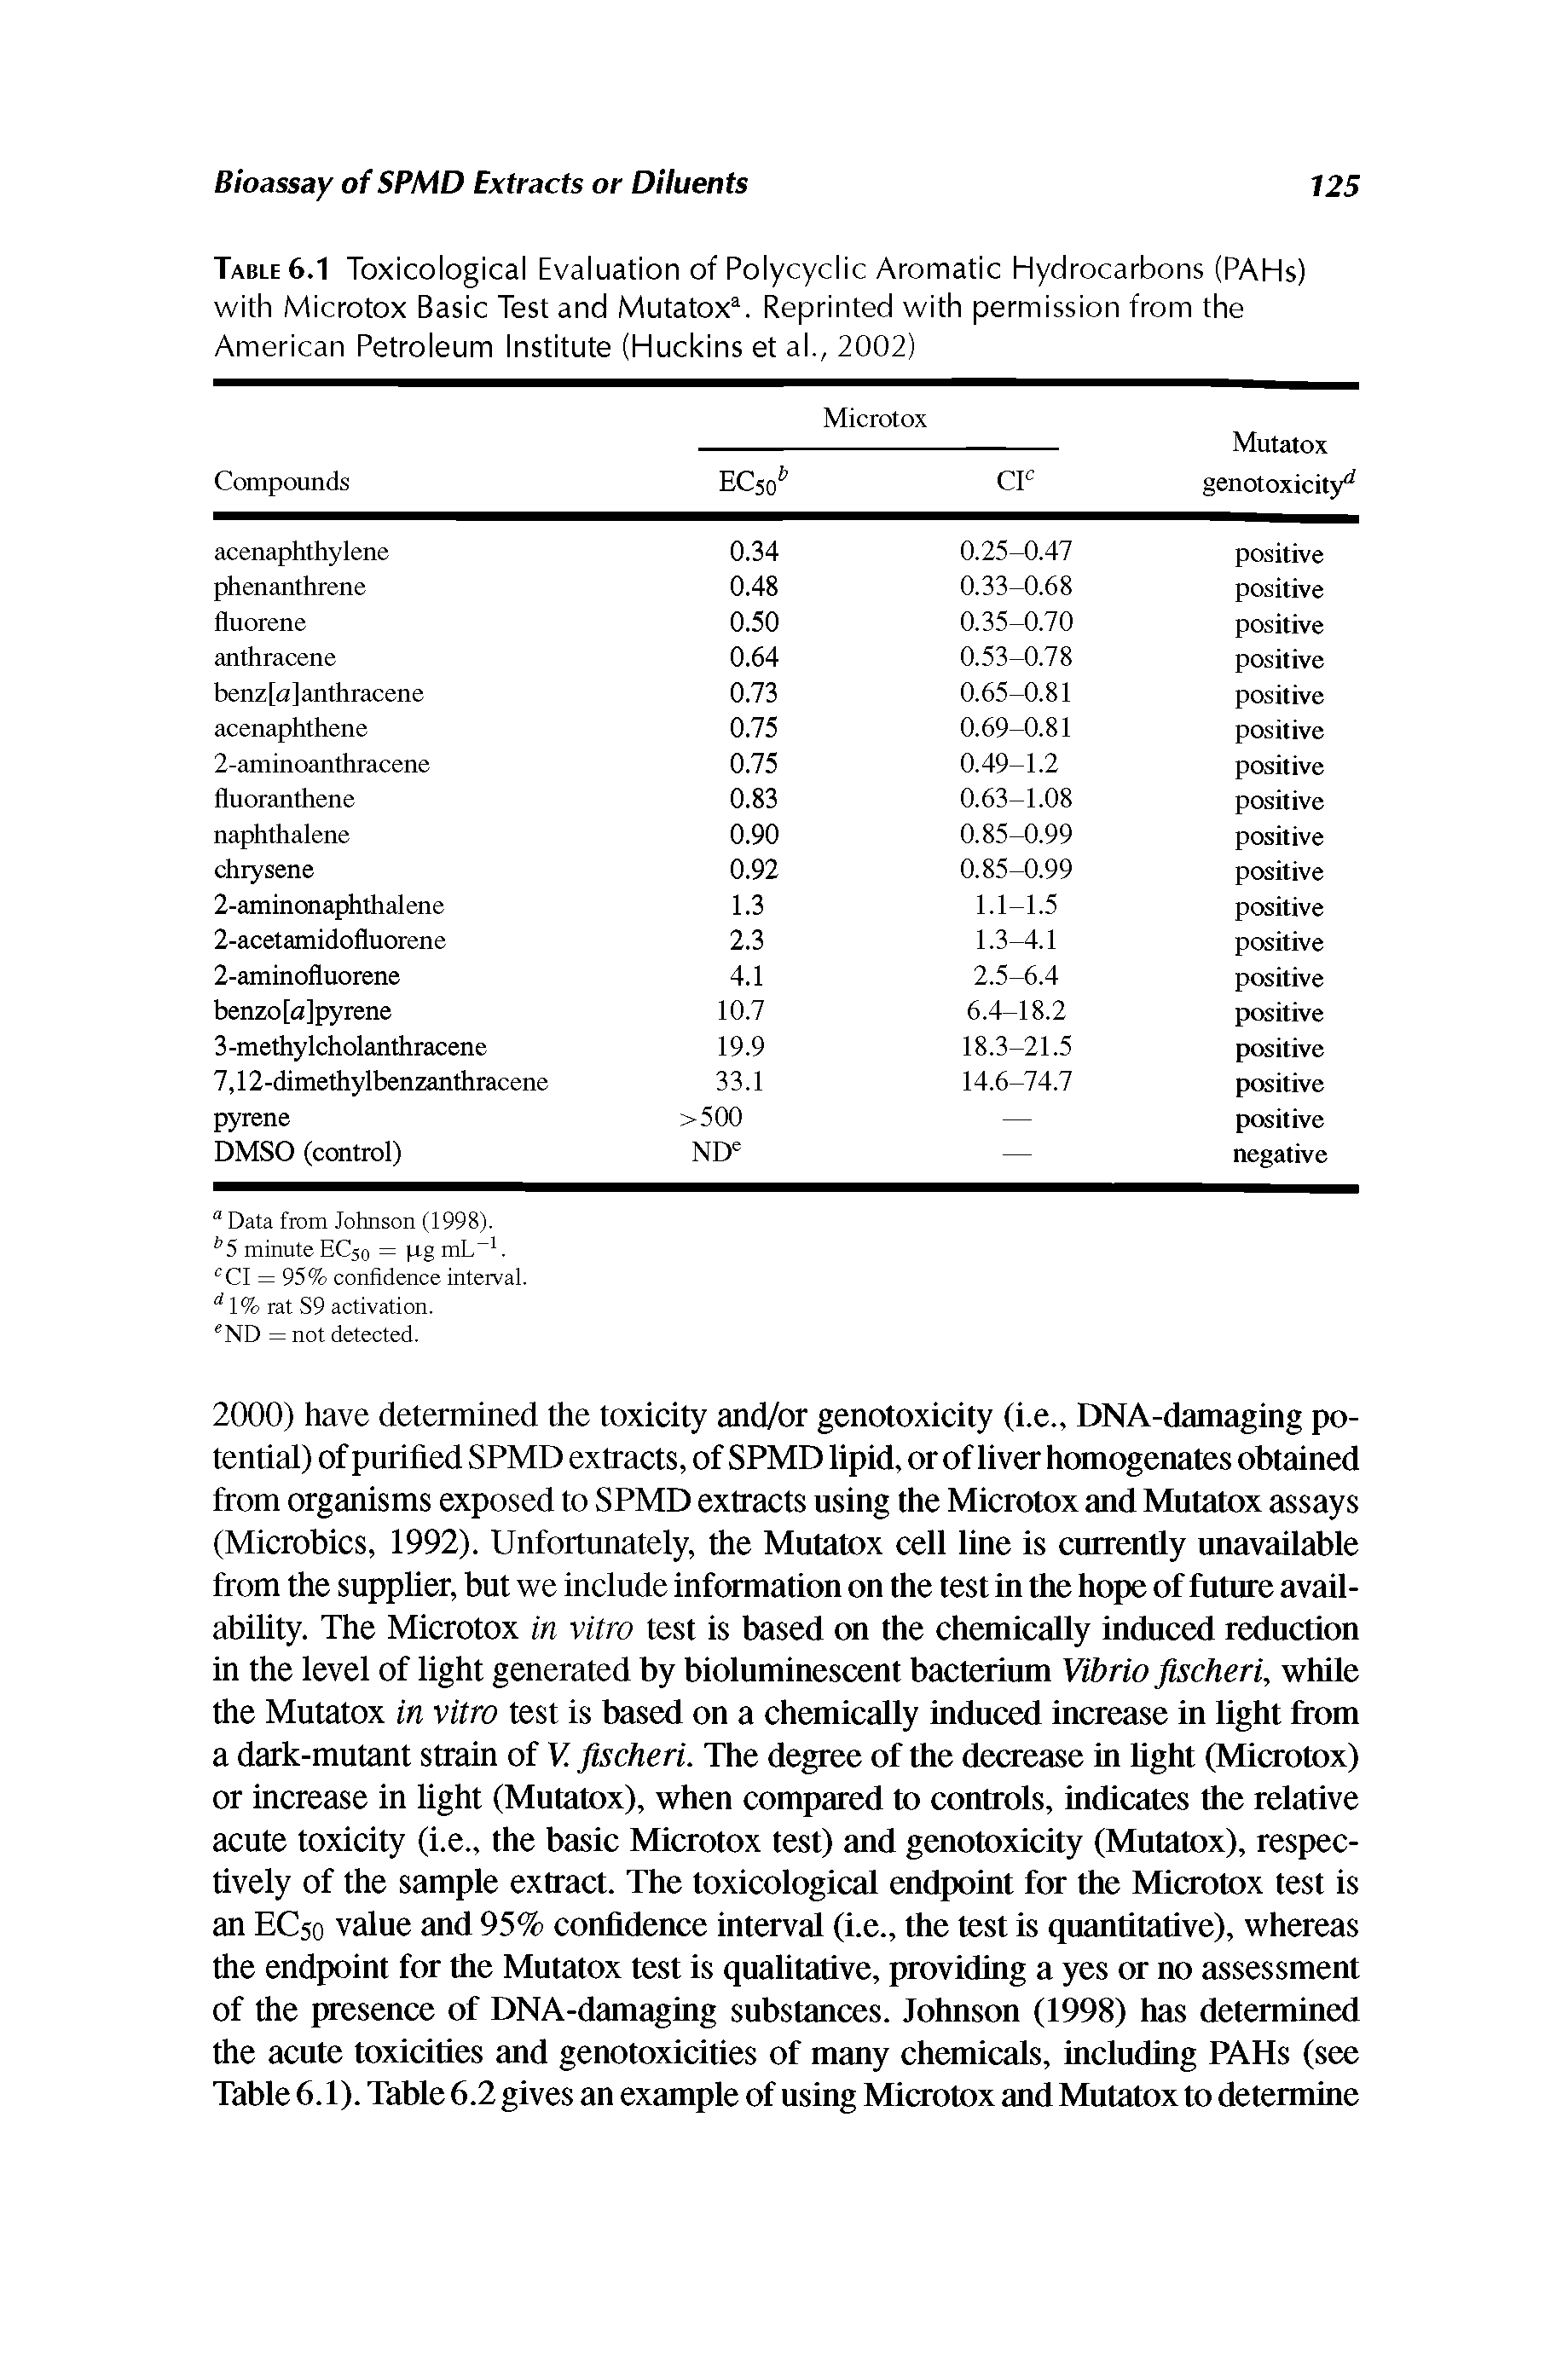 Table 6.1 Toxicological Evaluation of Polycyclic Aromatic Hydrocarbons (PAHs) with Microtox Basic Test and Mutatox. Reprinted with permission from the American Petroleum Institute (Huckins et al., 2002)...